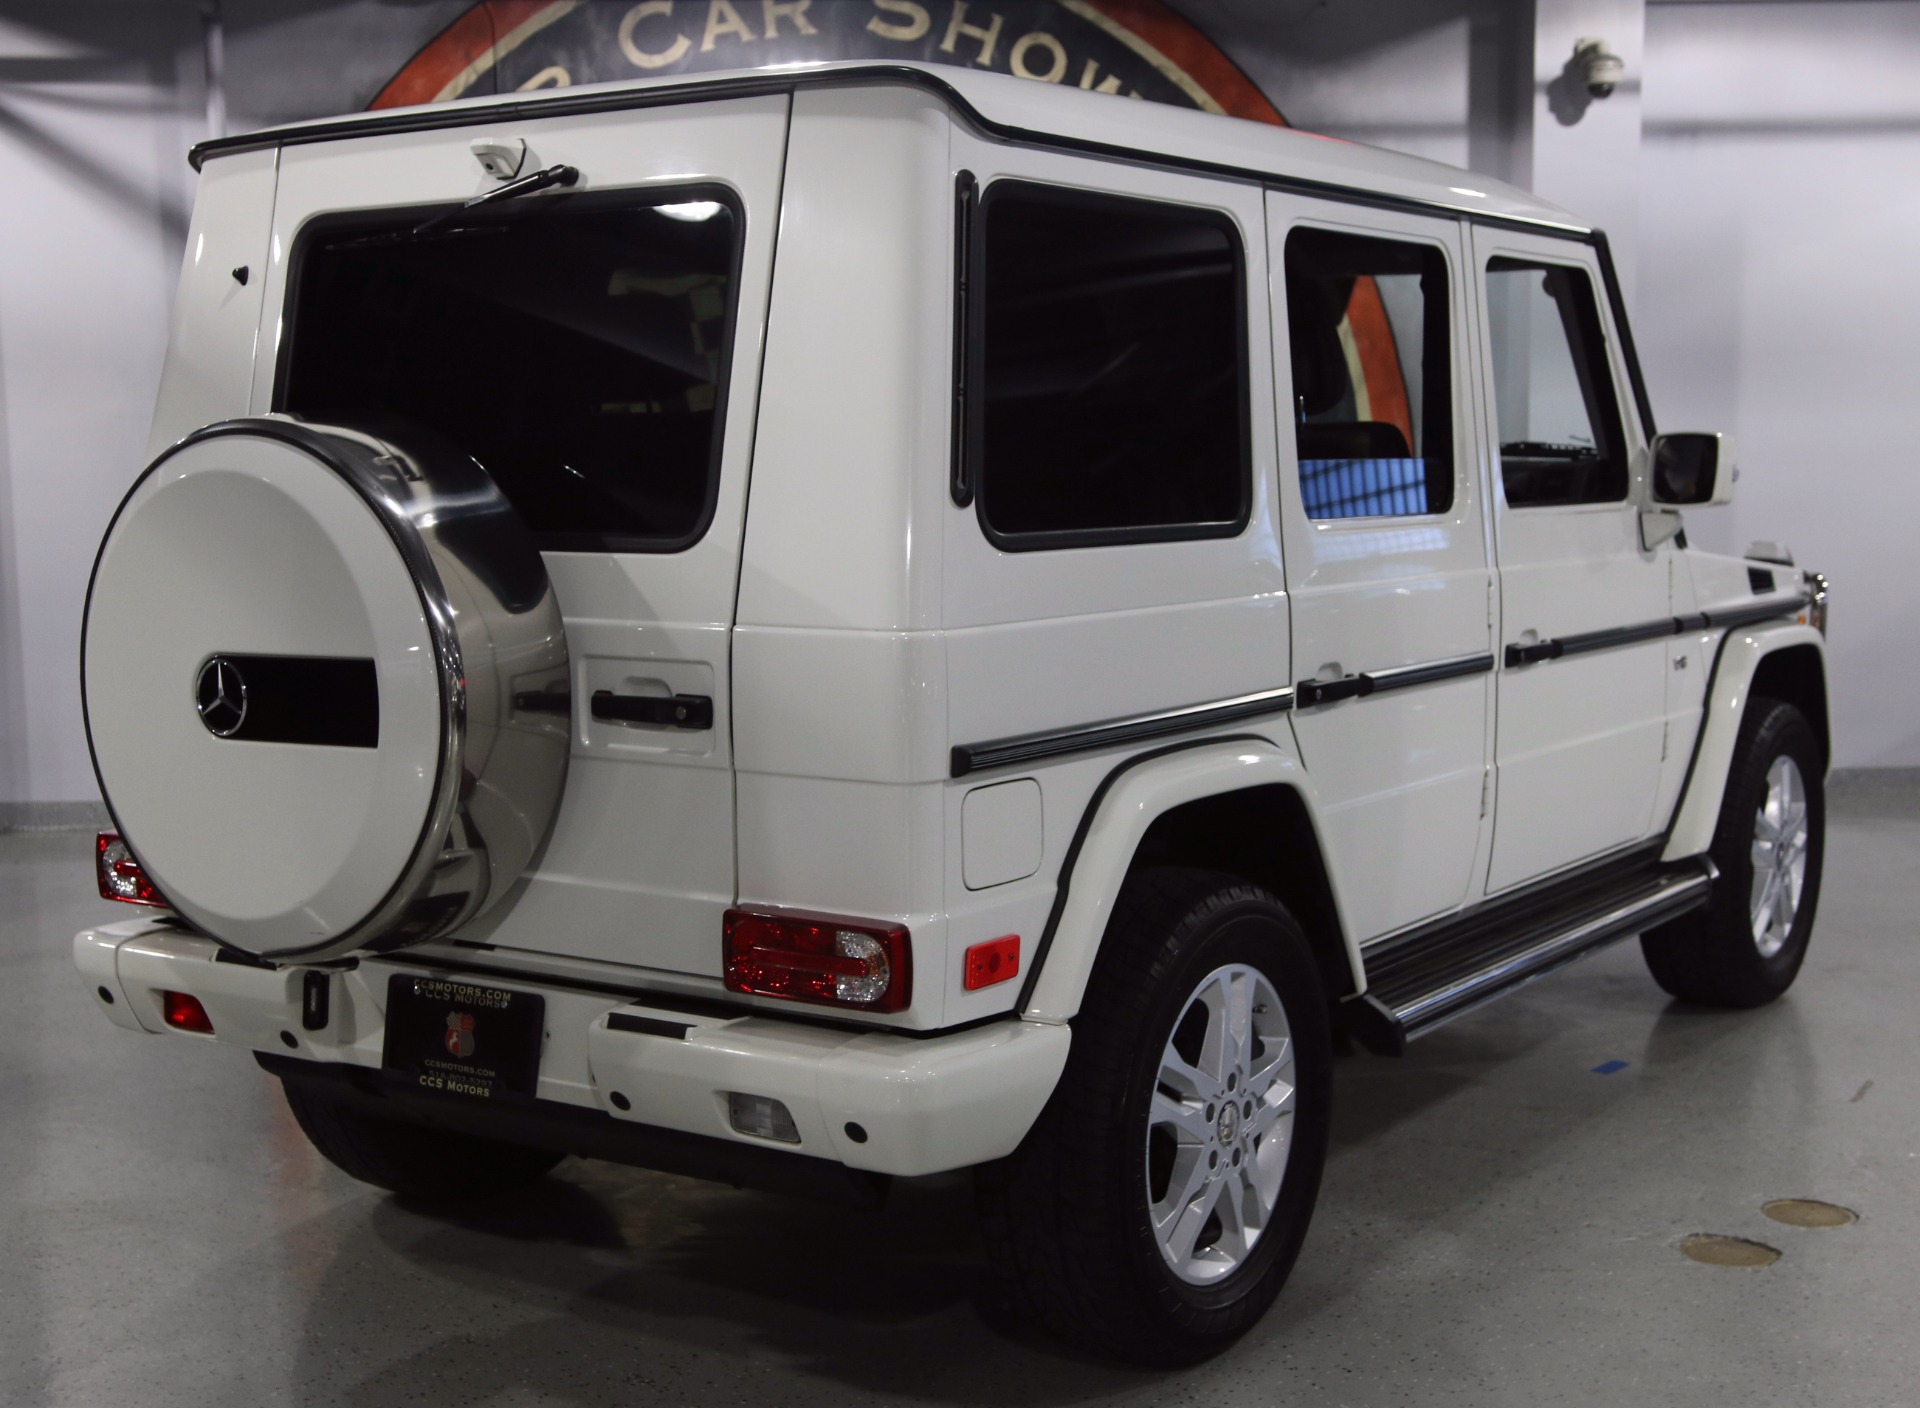 2012 Mercedes-Benz G-Class G550 4MATIC Stock # 1233 for sale near Oyster Bay, NY | NY Mercedes ...